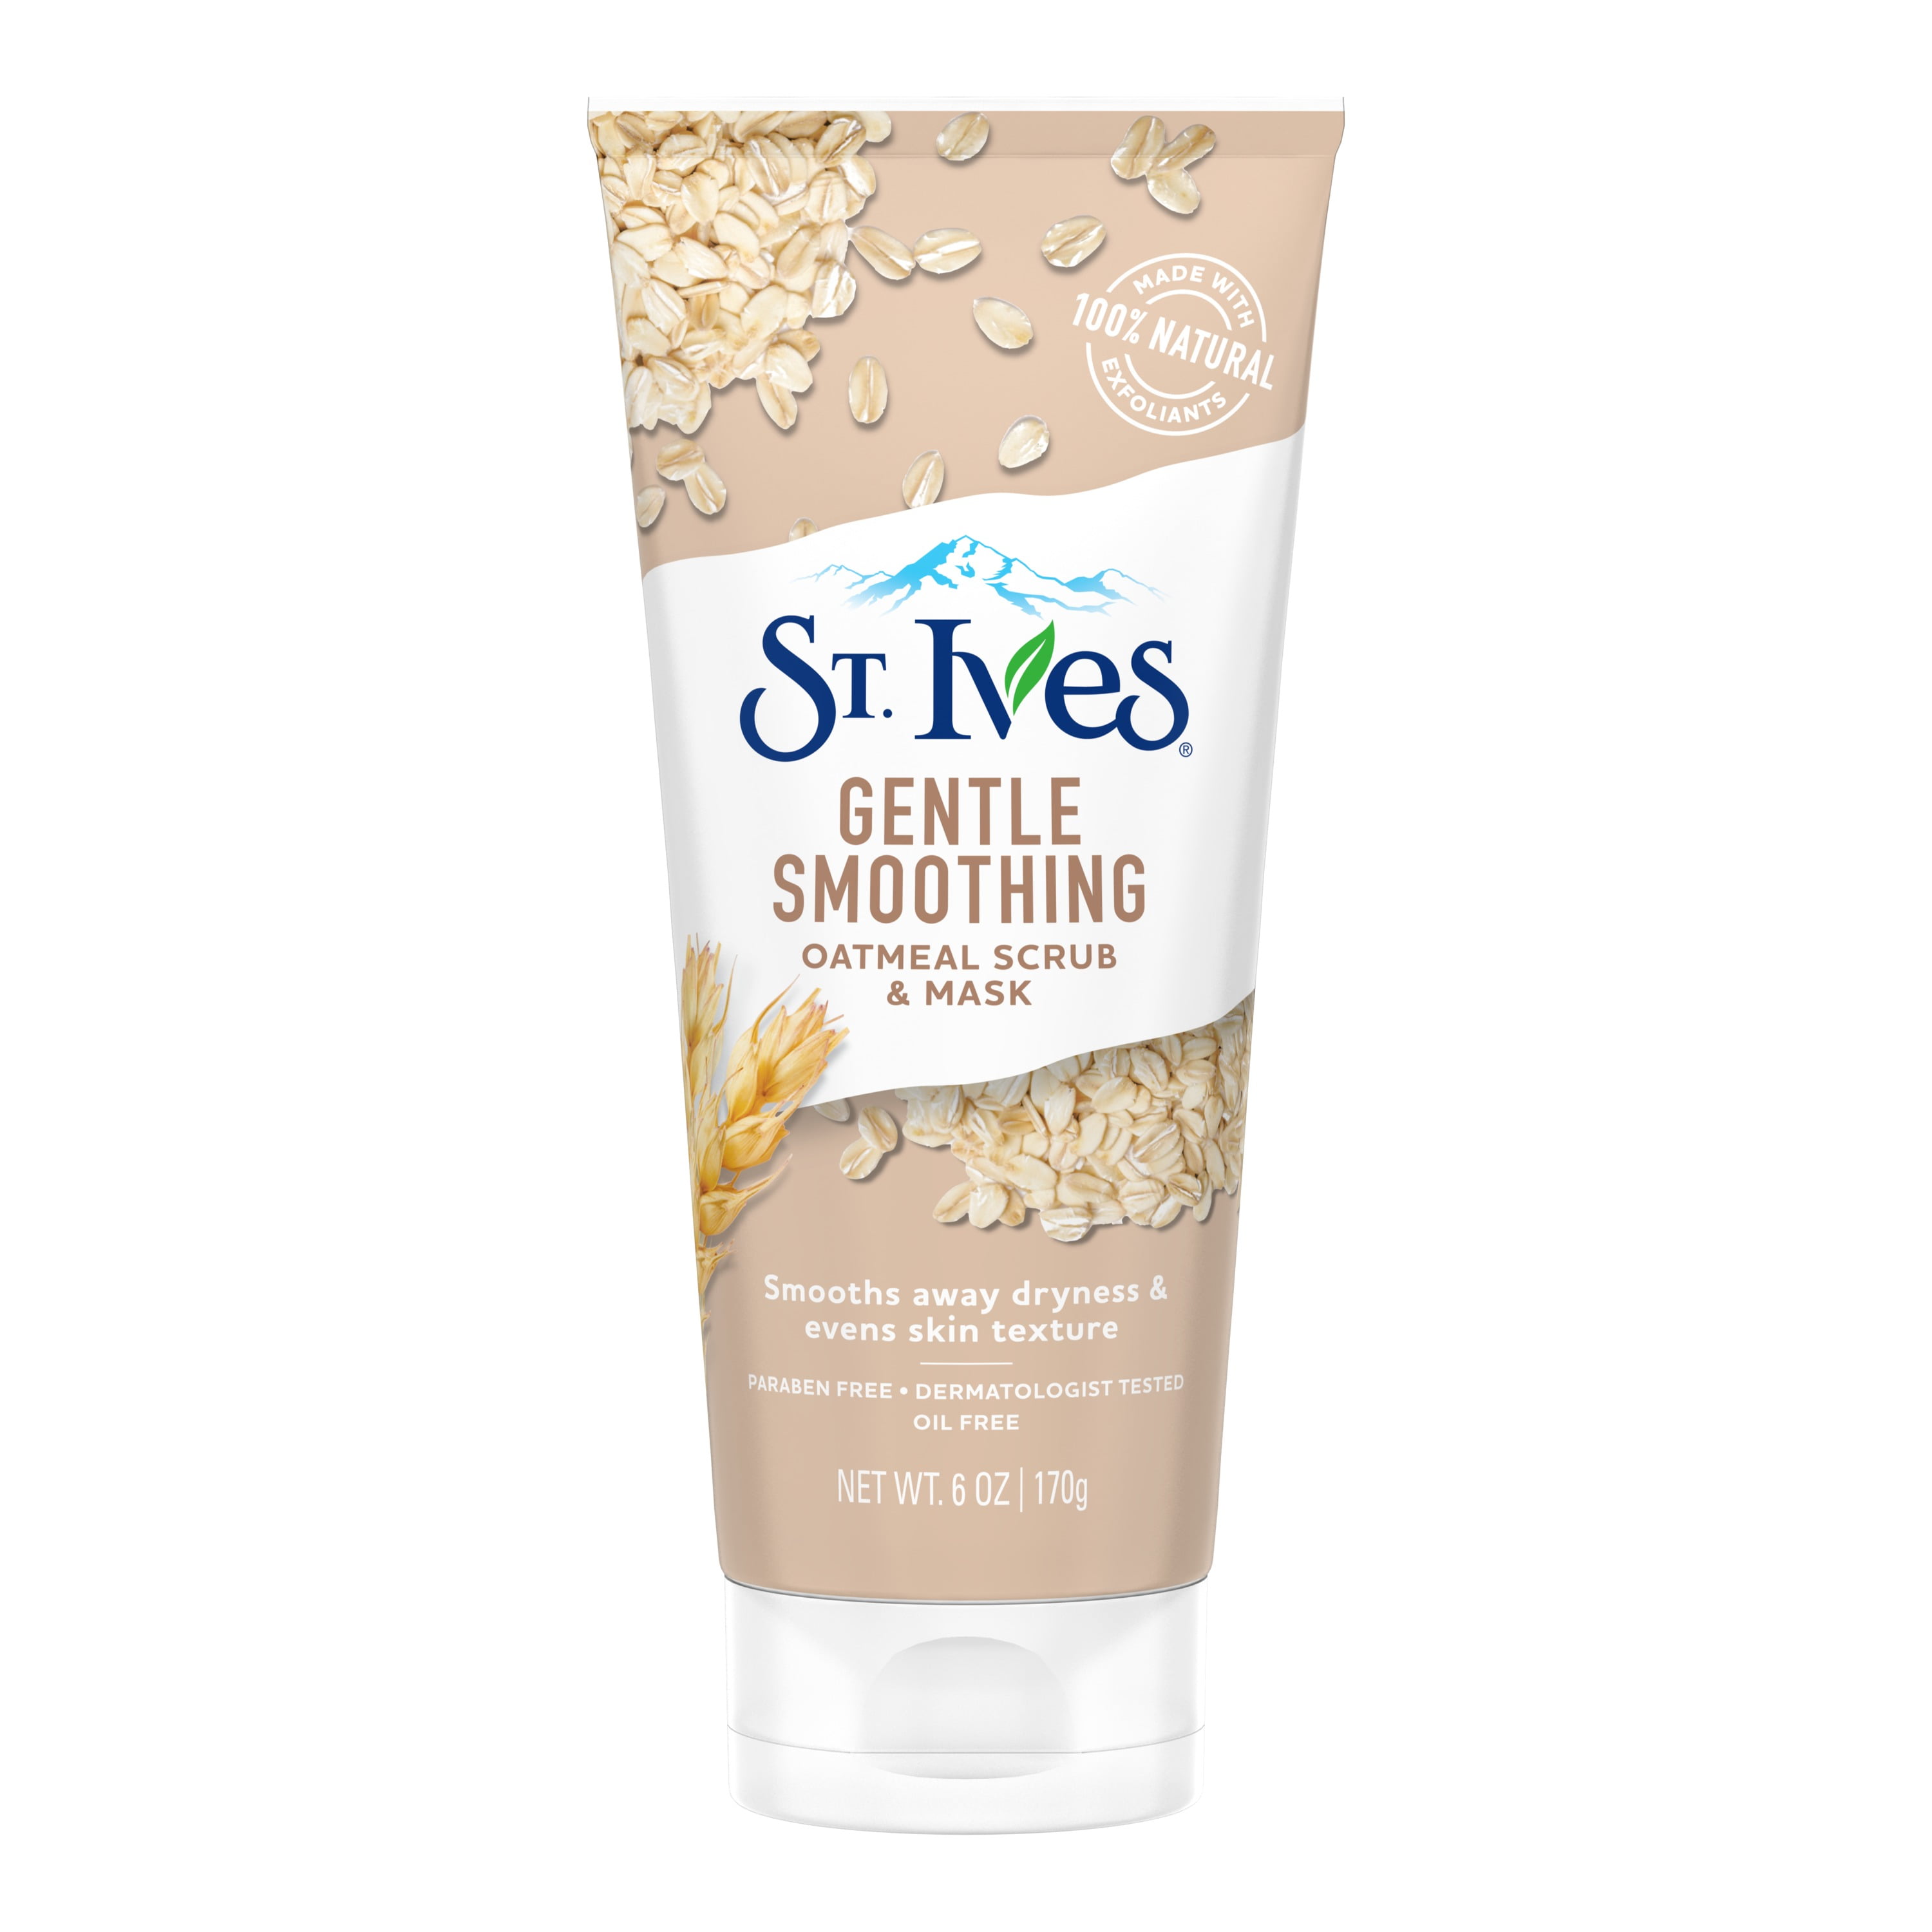 Parametre gear terning St. Ives Gentle Smoothing Face Scrub and Mask Oatmeal 6 oz - Walmart.com